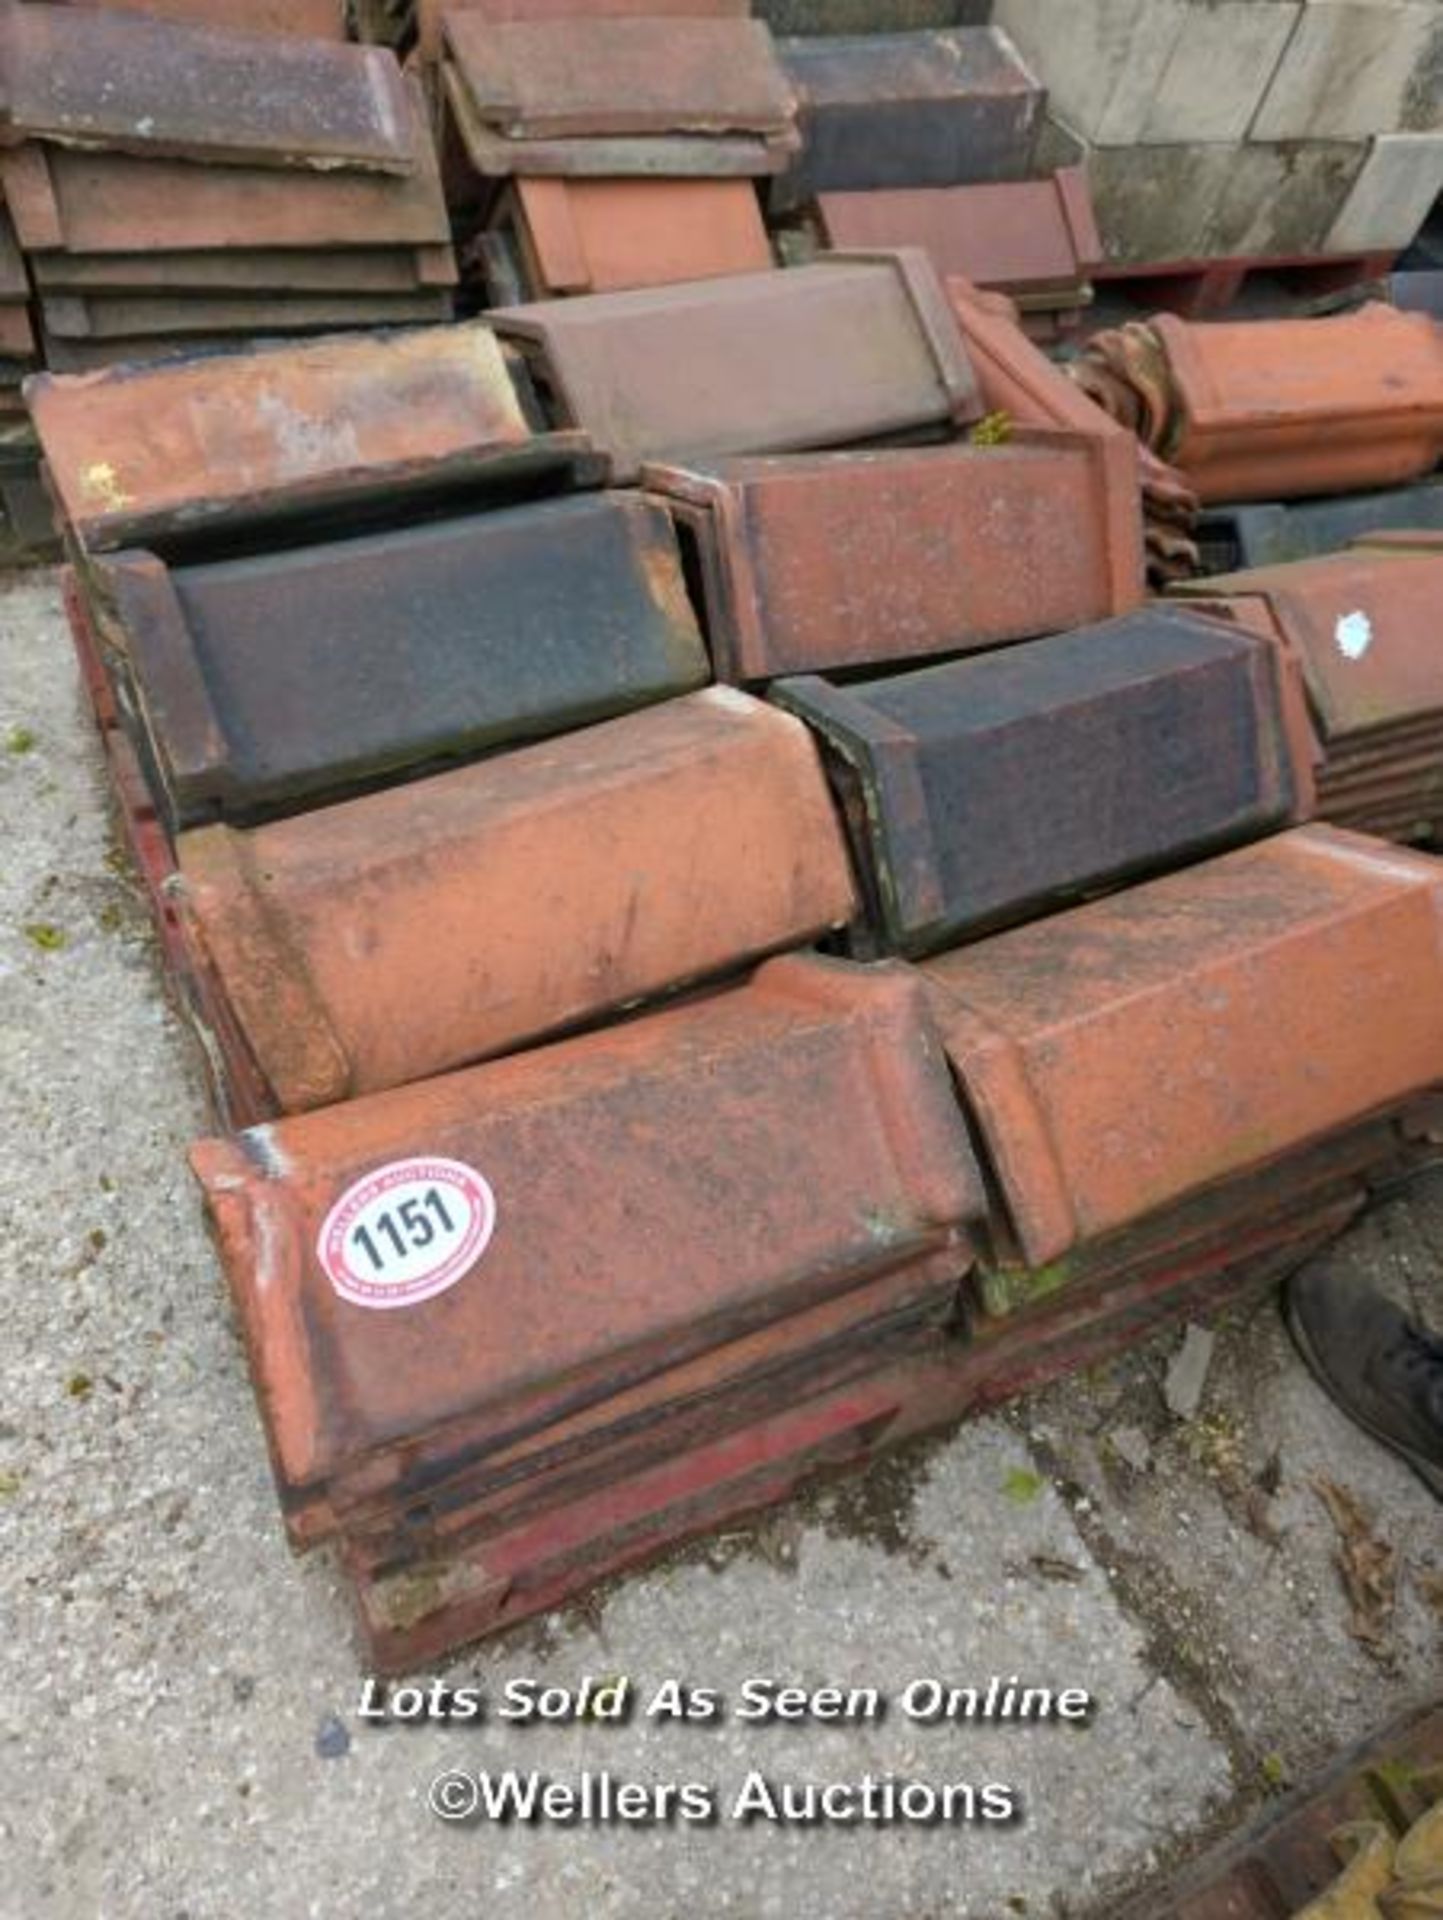 *APPROX X50 ANGLED RED RIDGE ROOF TILES, 50CM (L)